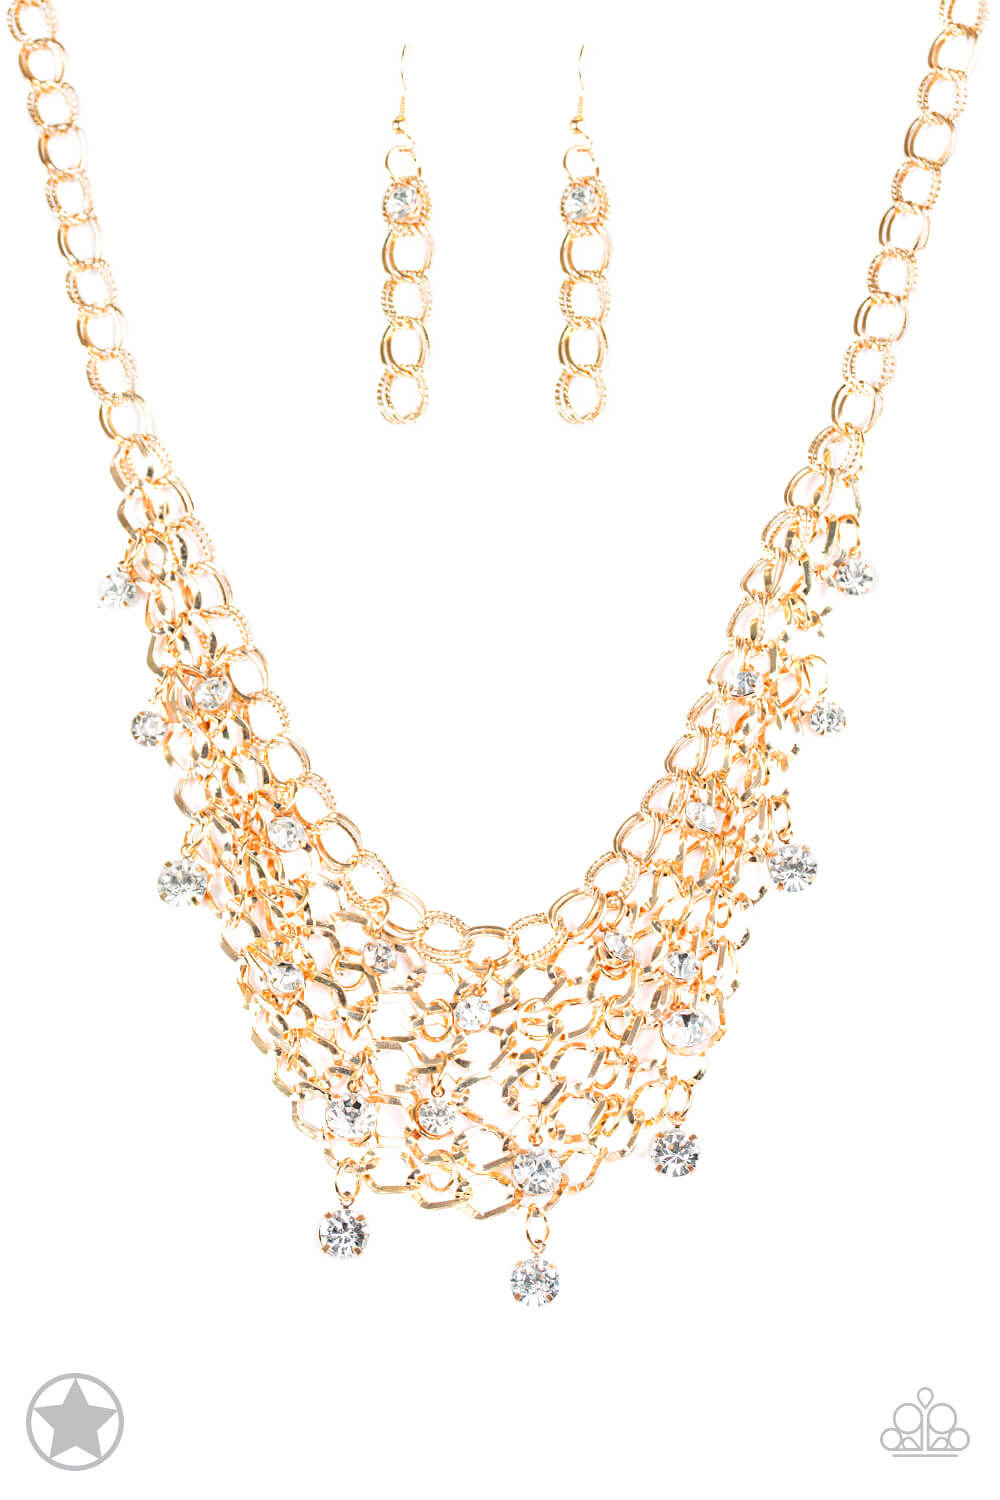 Fishing for Compliments - Gold Necklace Set - Princess Glam Shop